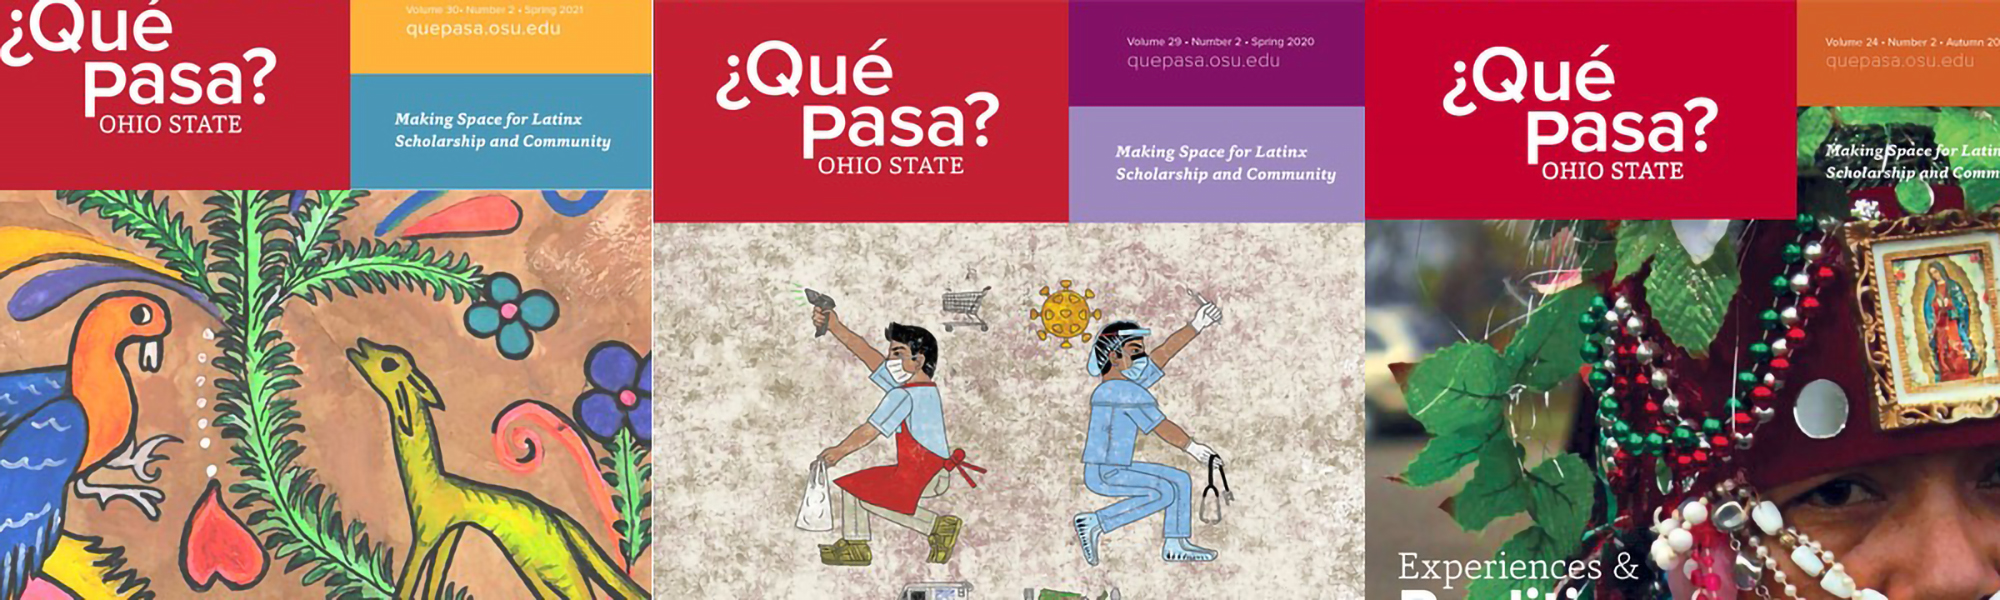 covers of ¿Qué Pasa, Ohio State? featuring Latine artwork